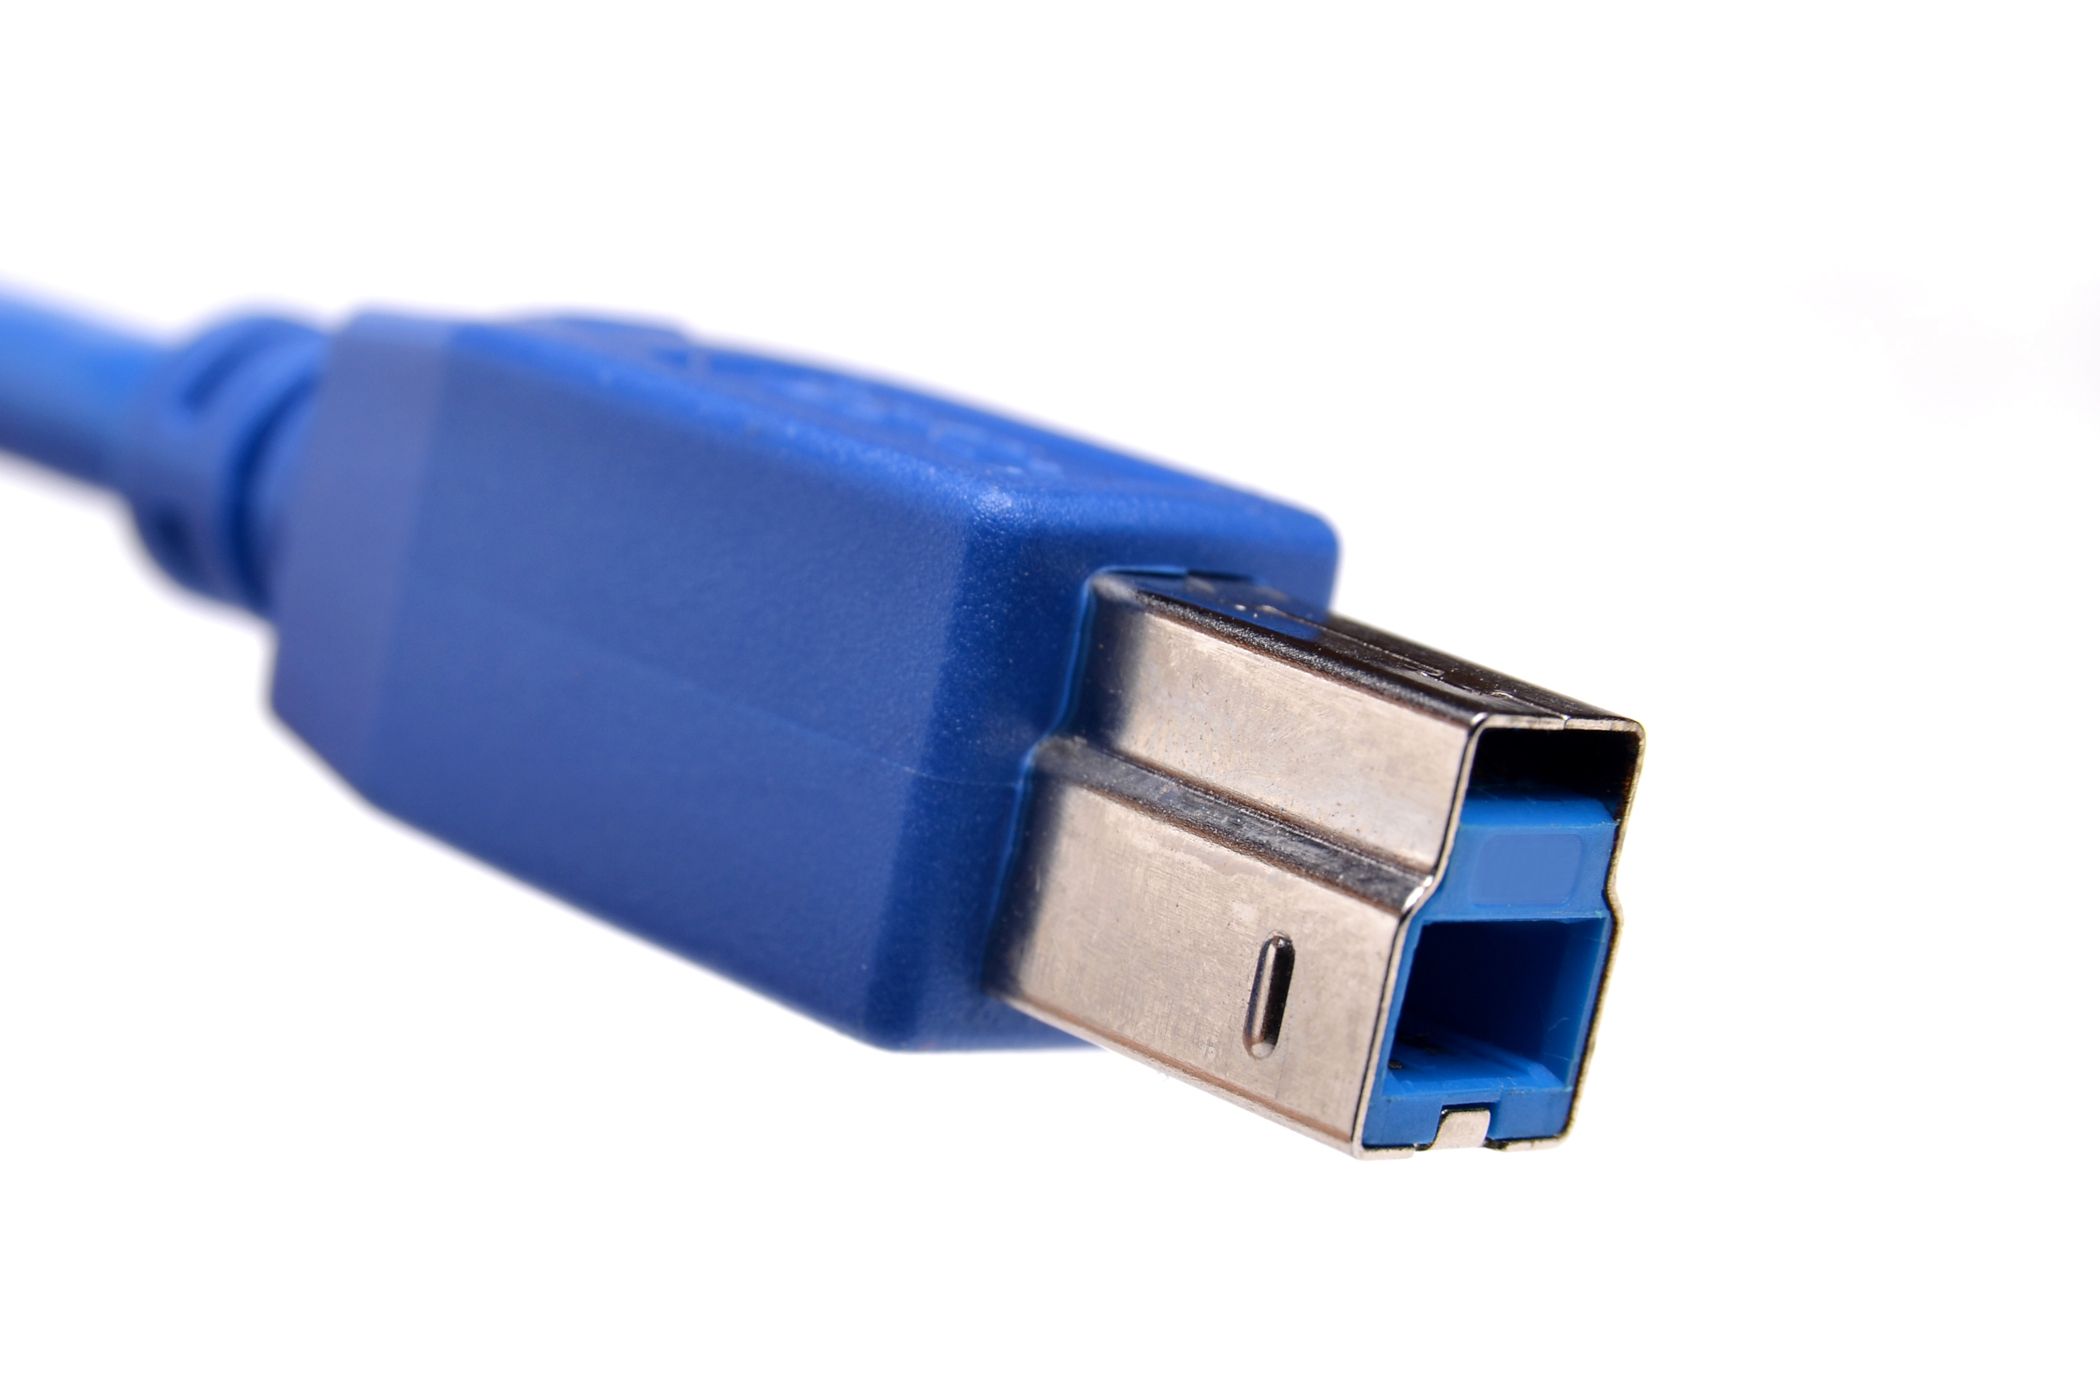 Universal Serial Bus (USB) 3.0 type B connector isolated on white.